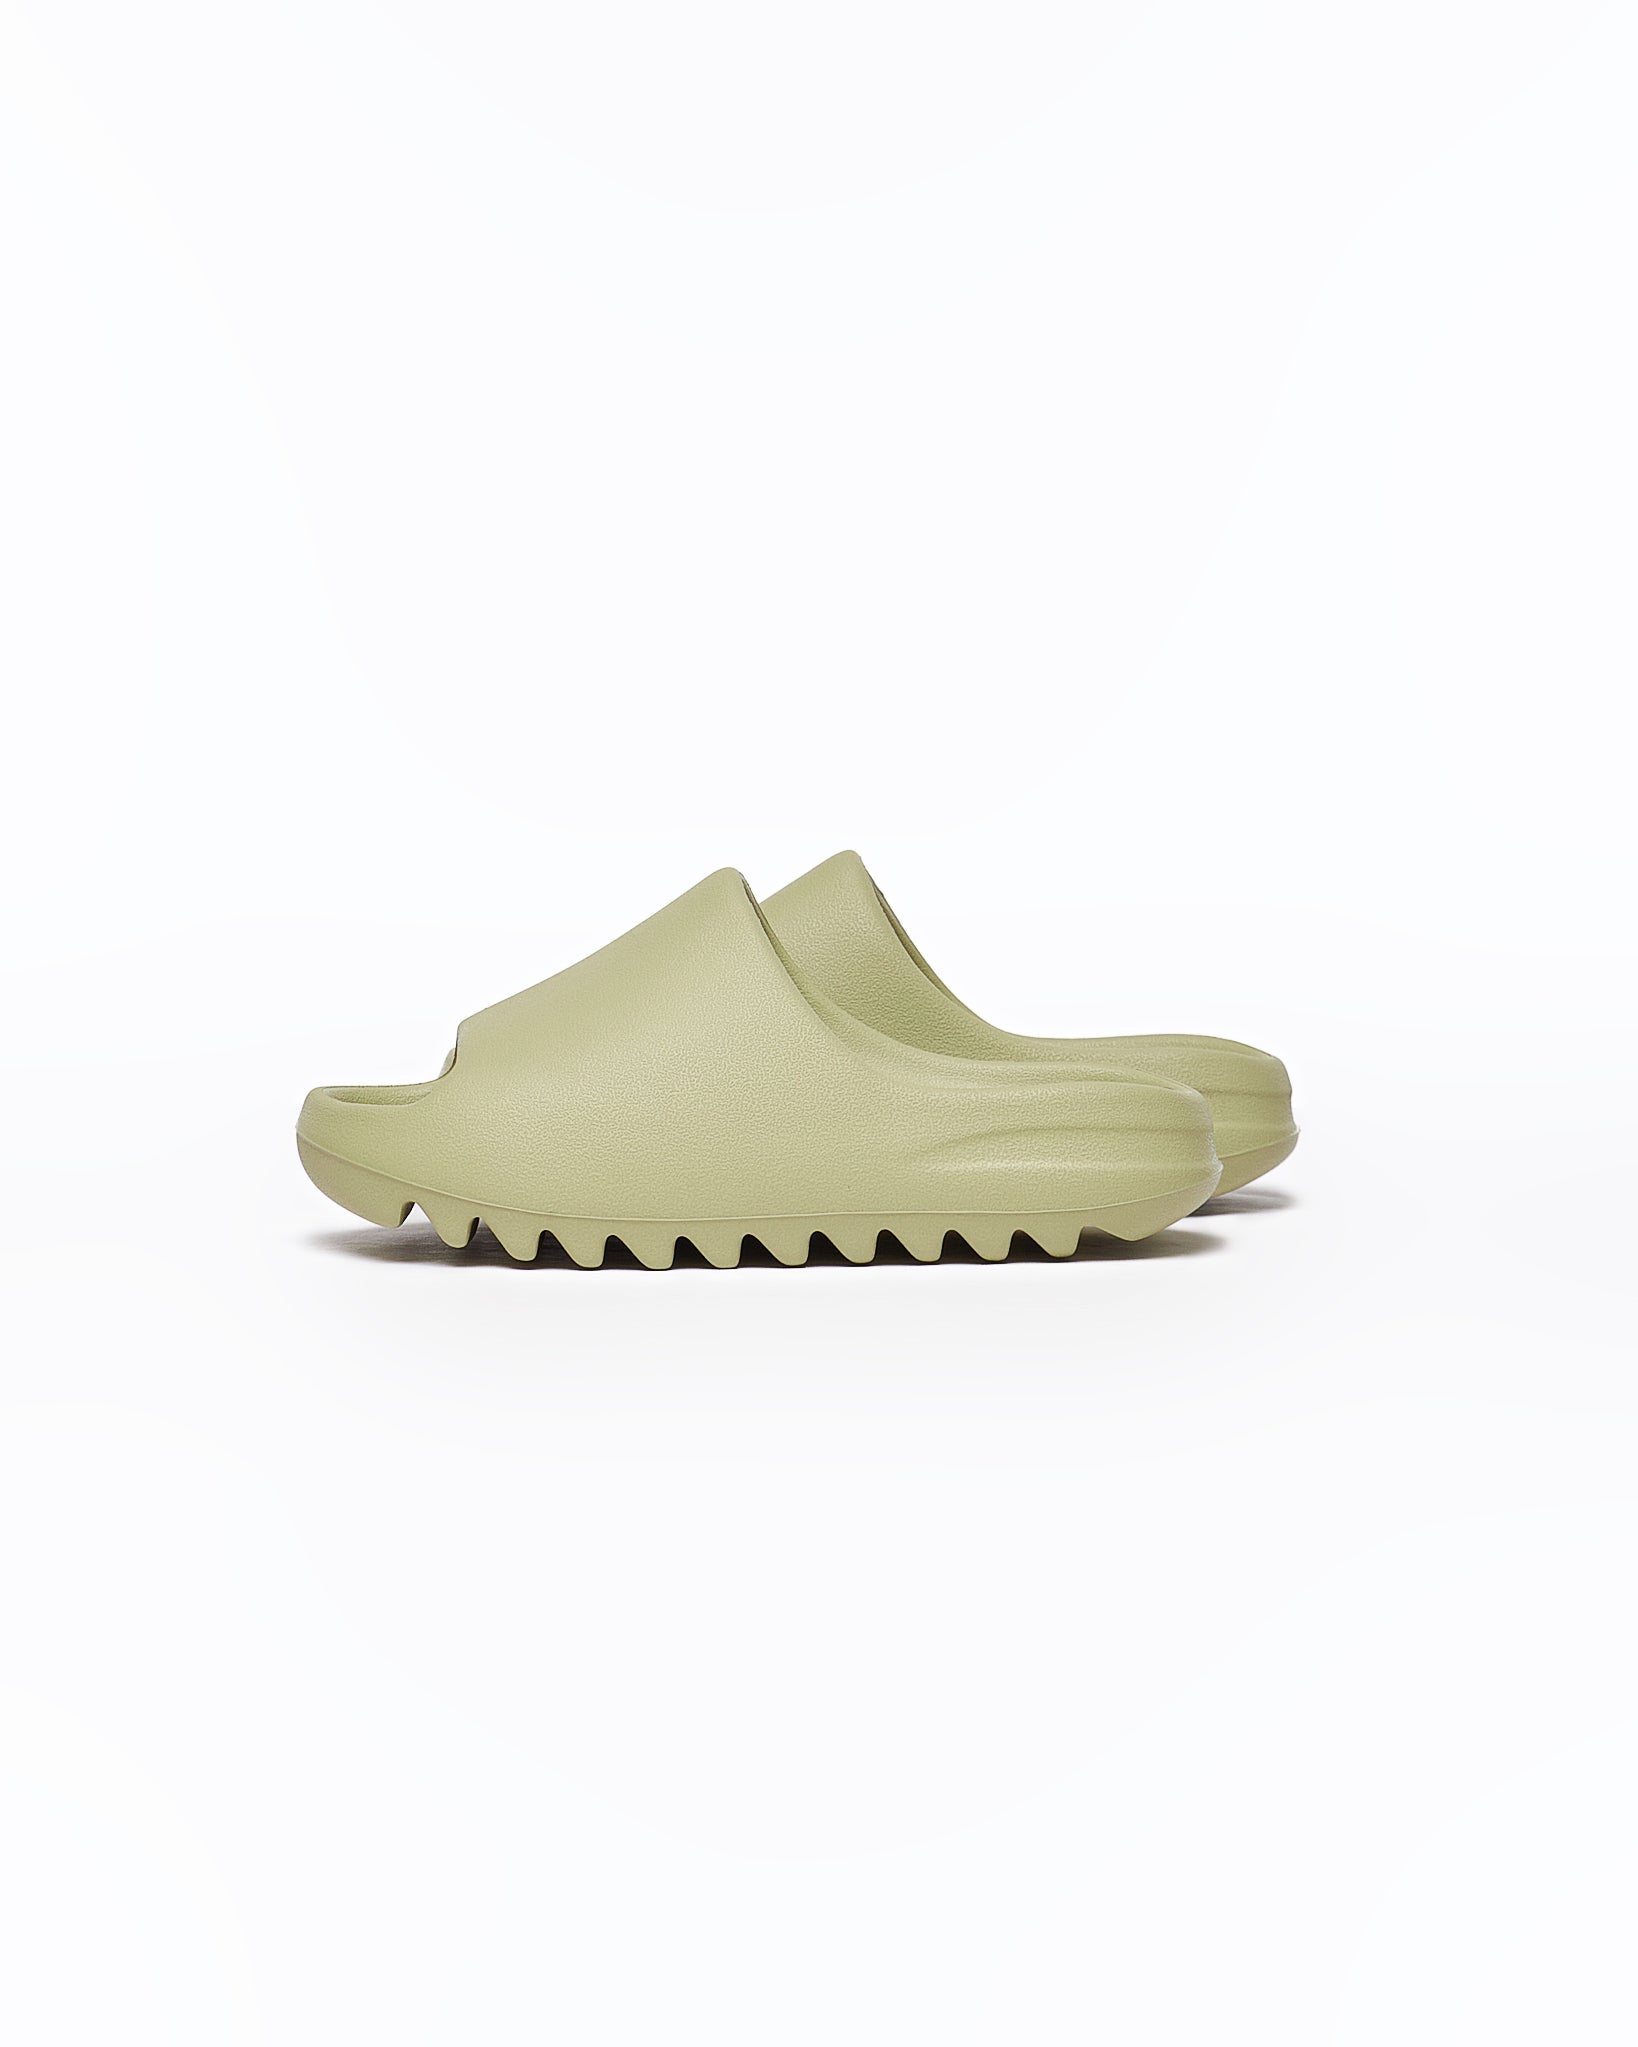 MOI OUTFIT-ADI Yeezy Lady Light Green Slide 38.90